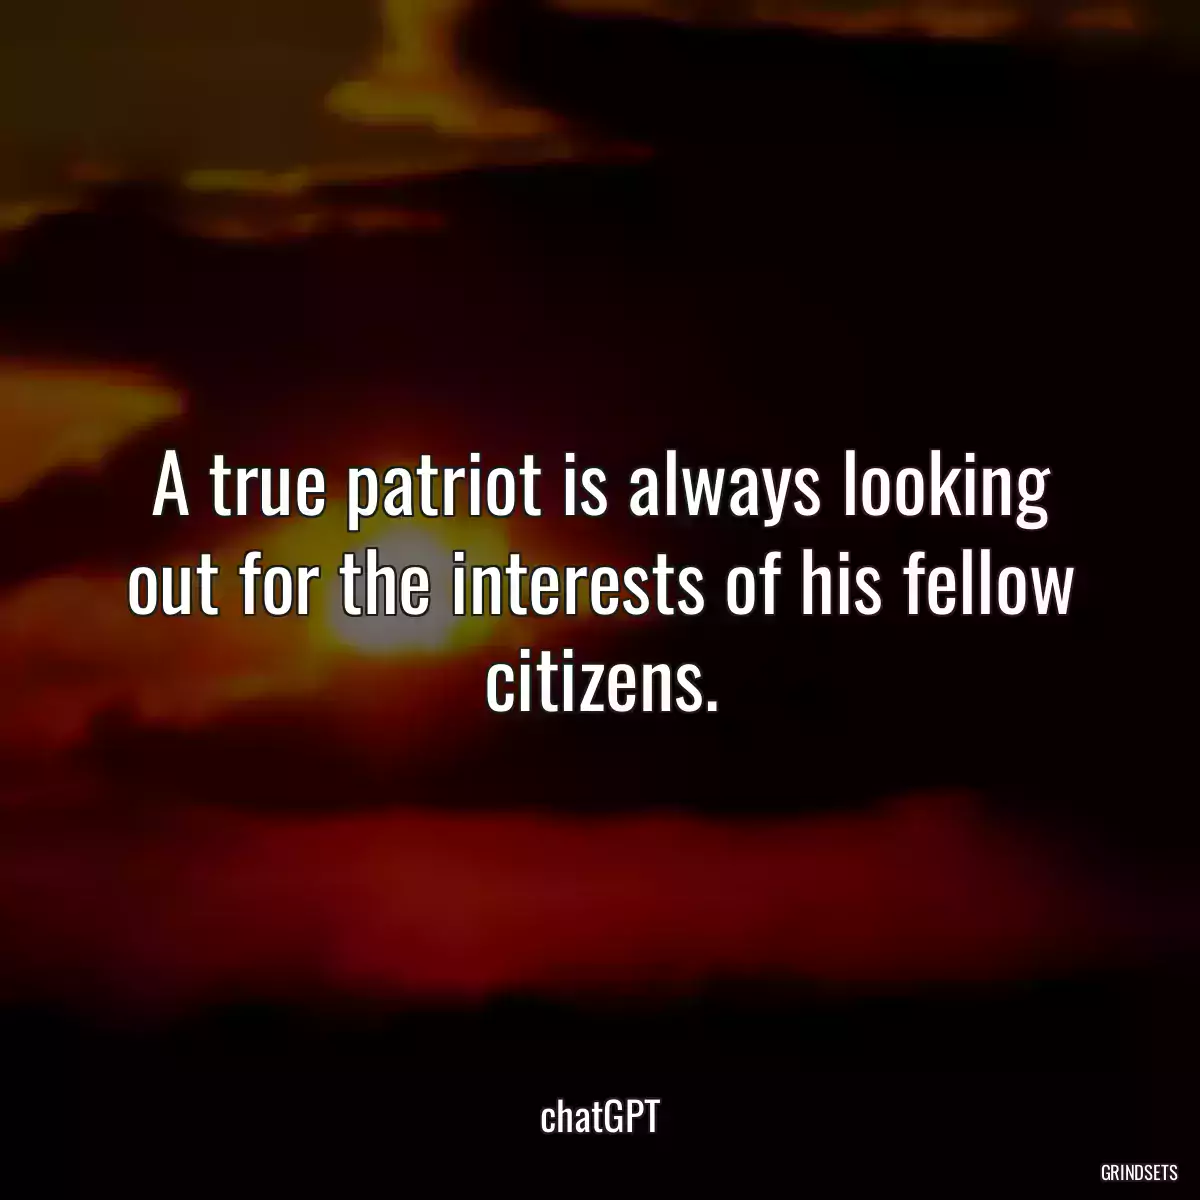 A true patriot is always looking out for the interests of his fellow citizens.